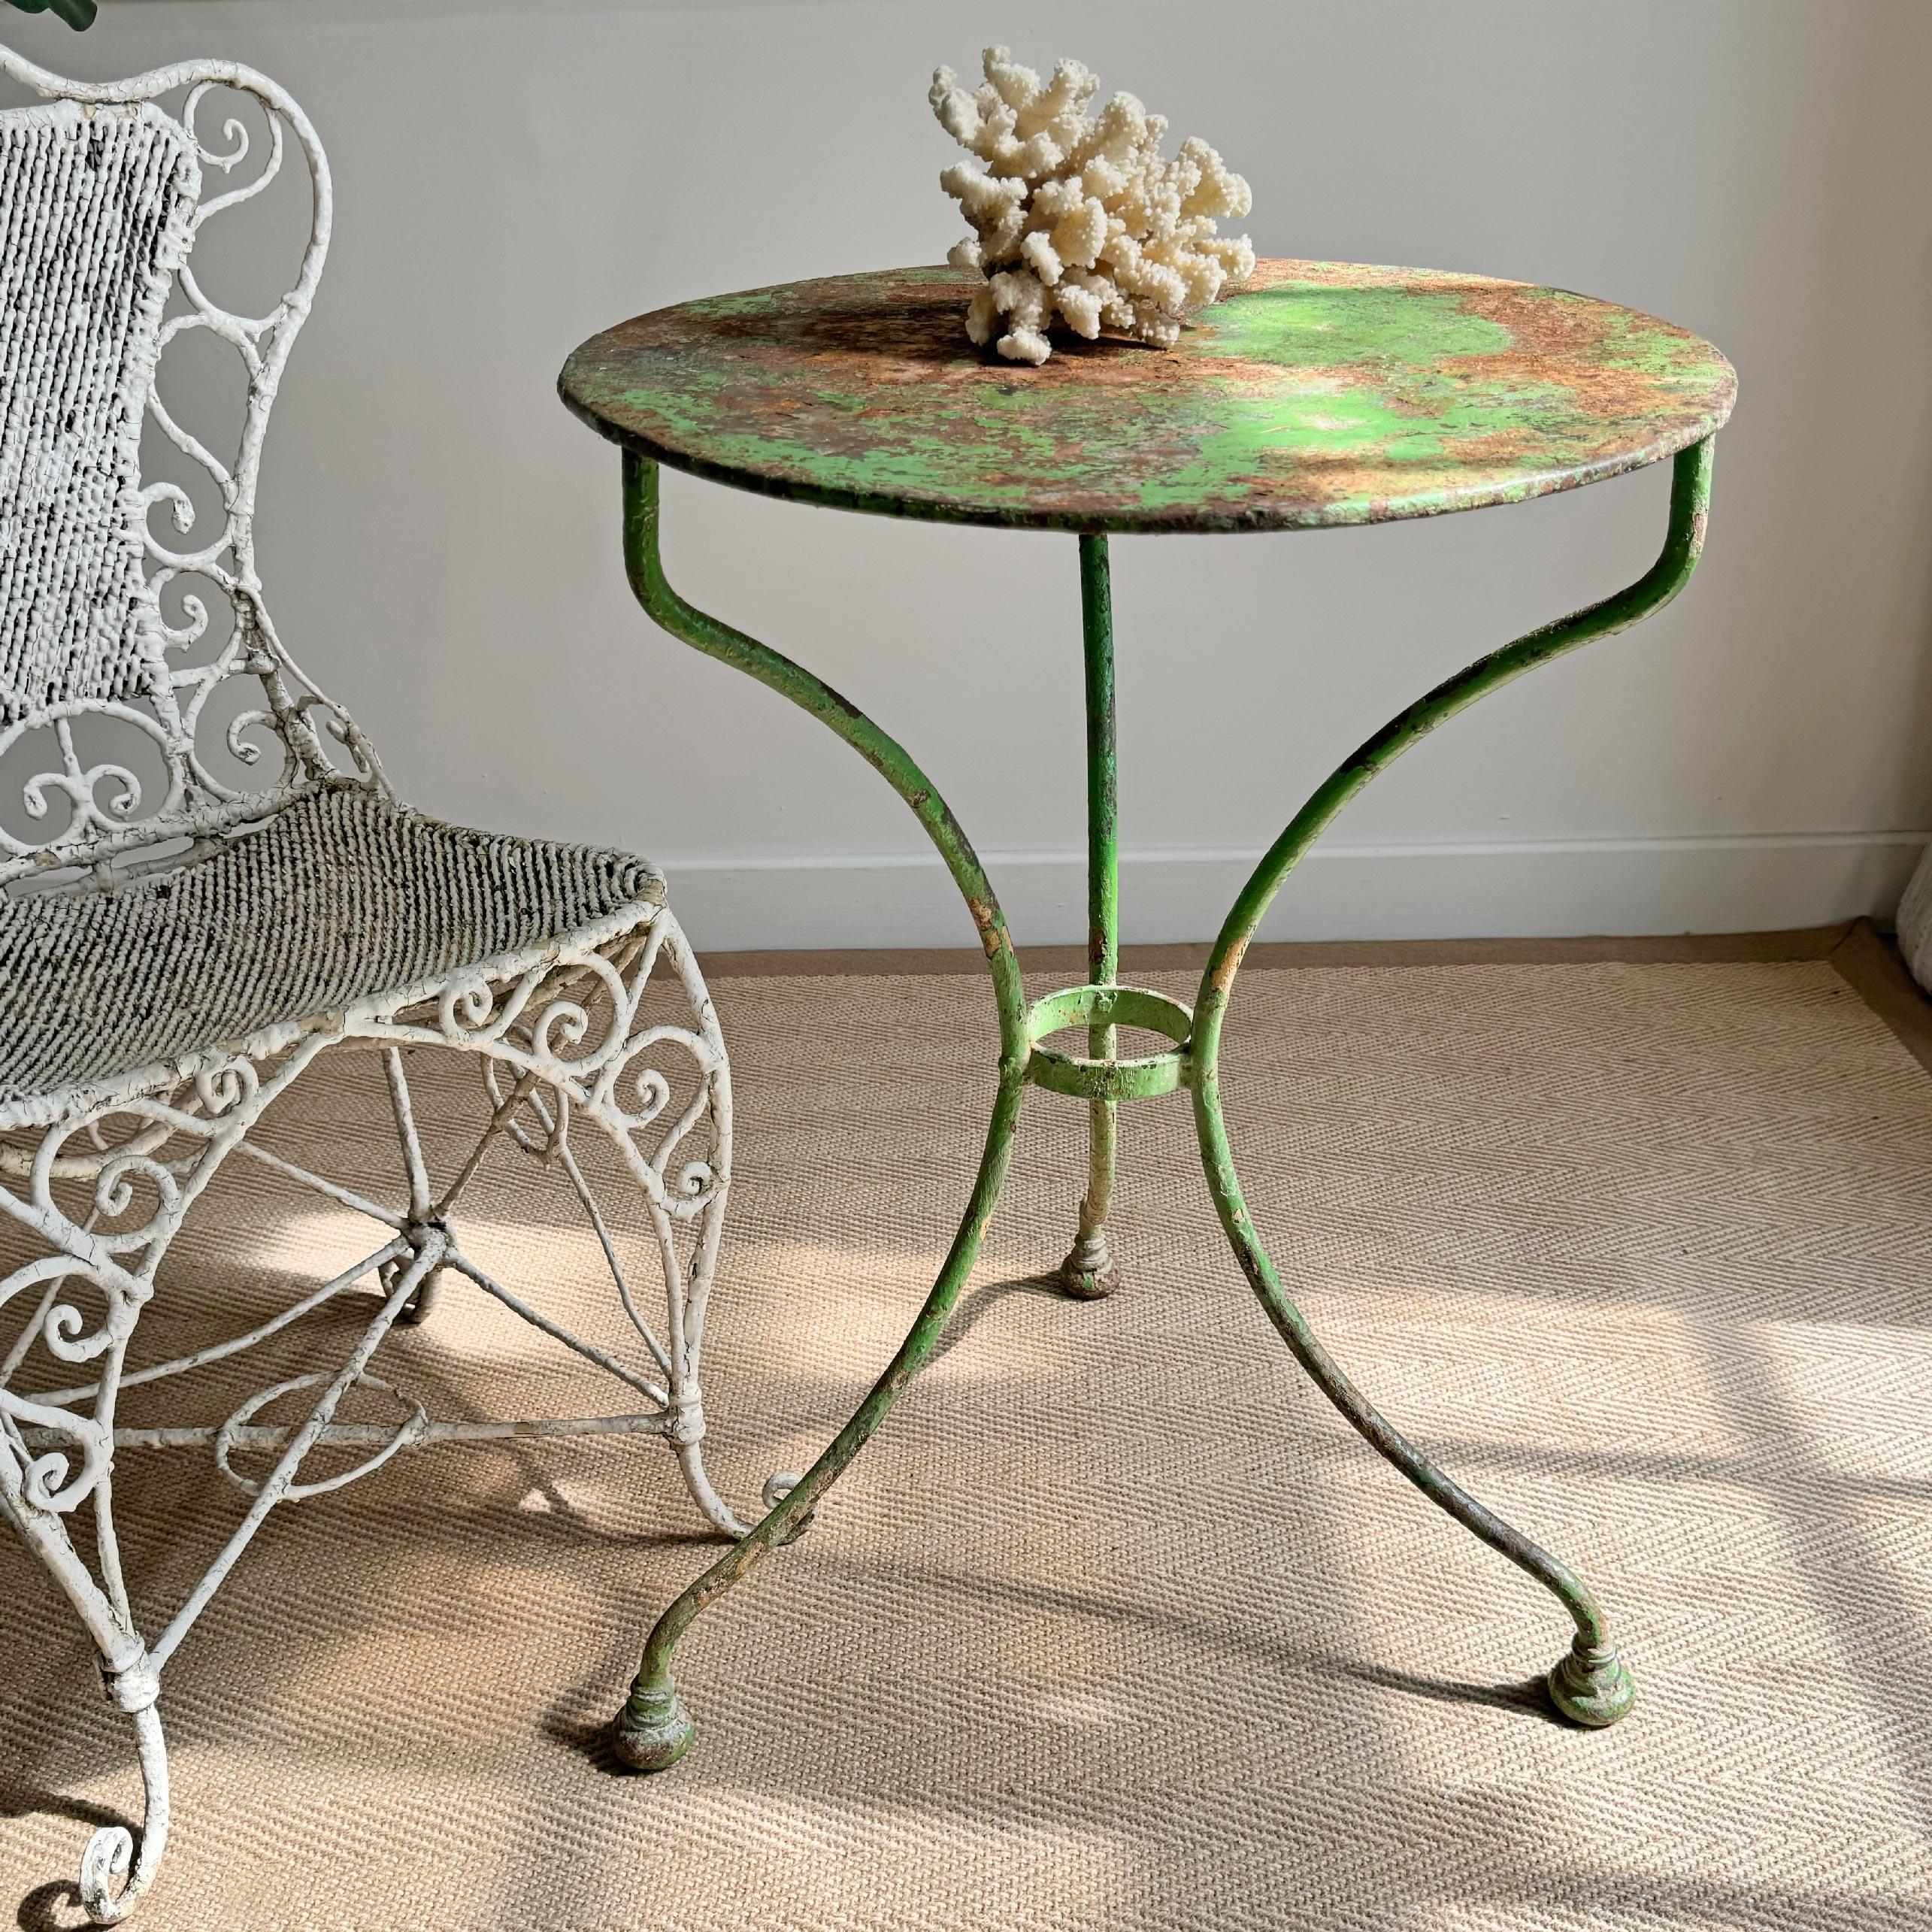 A very pretty French cafe table, hand made in iron and dating to the end of the 1800's, beautiful green paint, with losses to the paint in some areas, a very usable size, with very unusual ball feet.



Height 69 cm x 50.5 cm Width

Feet are 54 cm